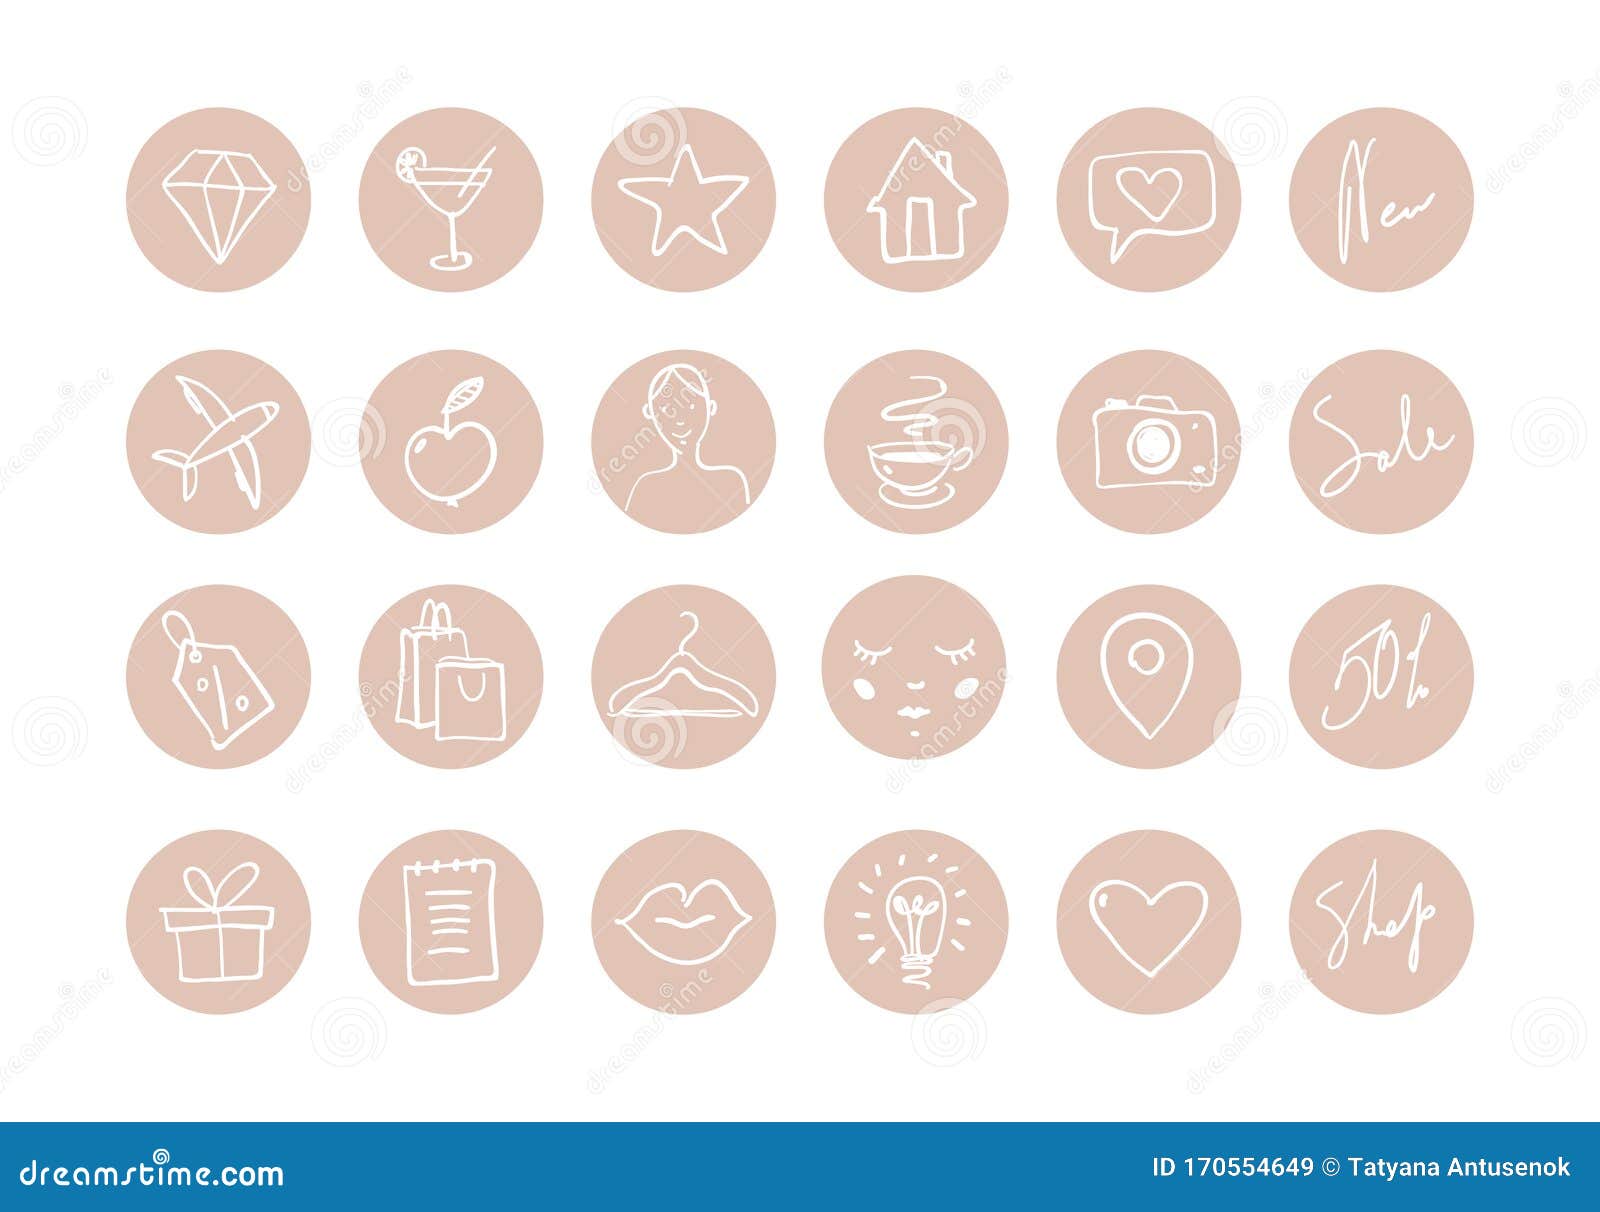 Set of Hand Drawn Round Icons for Social Networks, Beauty, Fashion ...